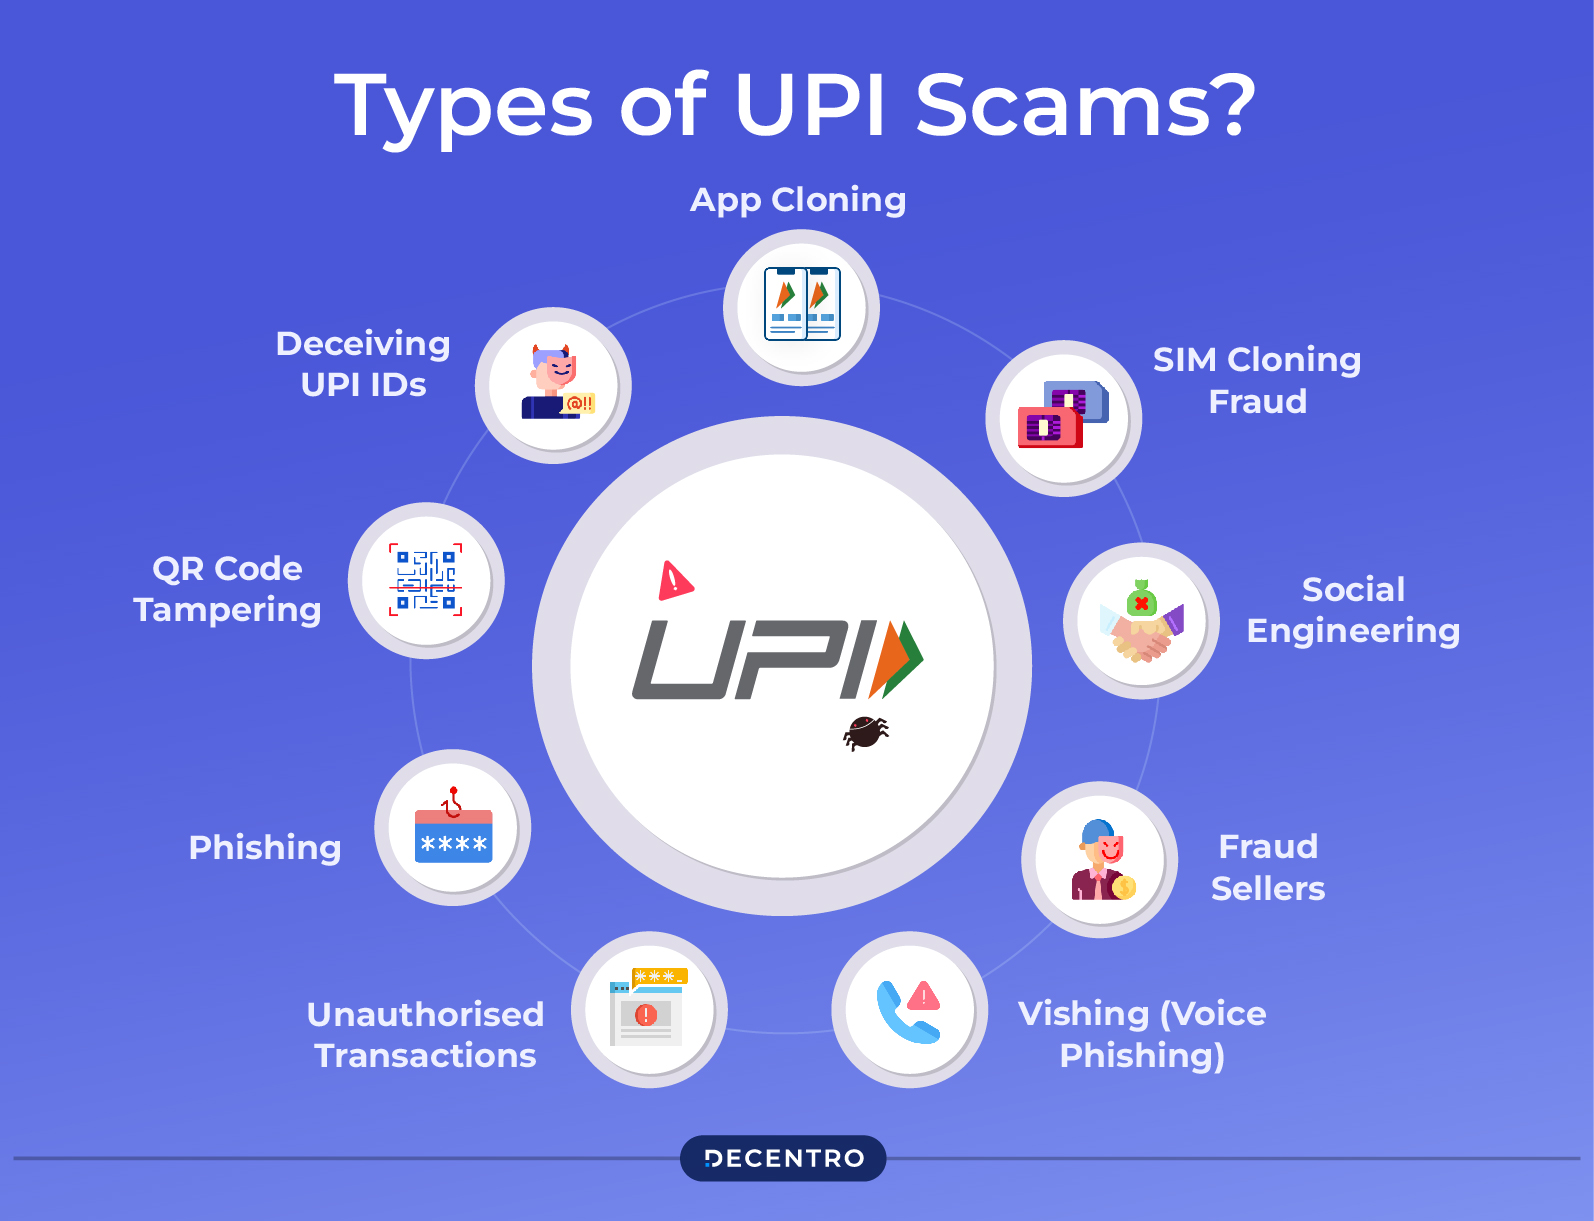 Types of UPI scams